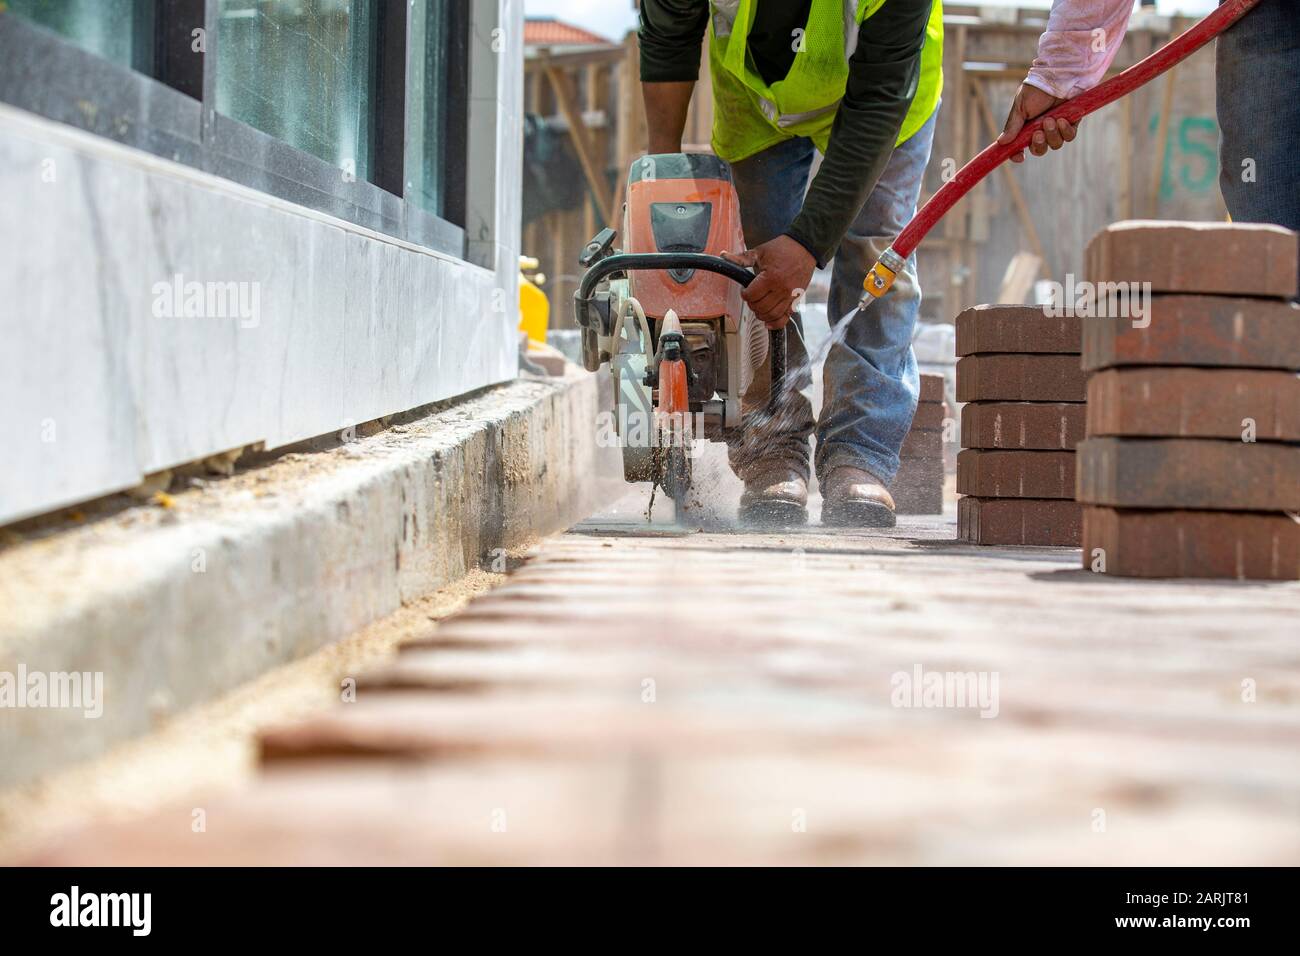 Construction pavers workers working on a job. one is cutting the bricks in a straight line and the other is cooling the blade with water spray. Stock Photo